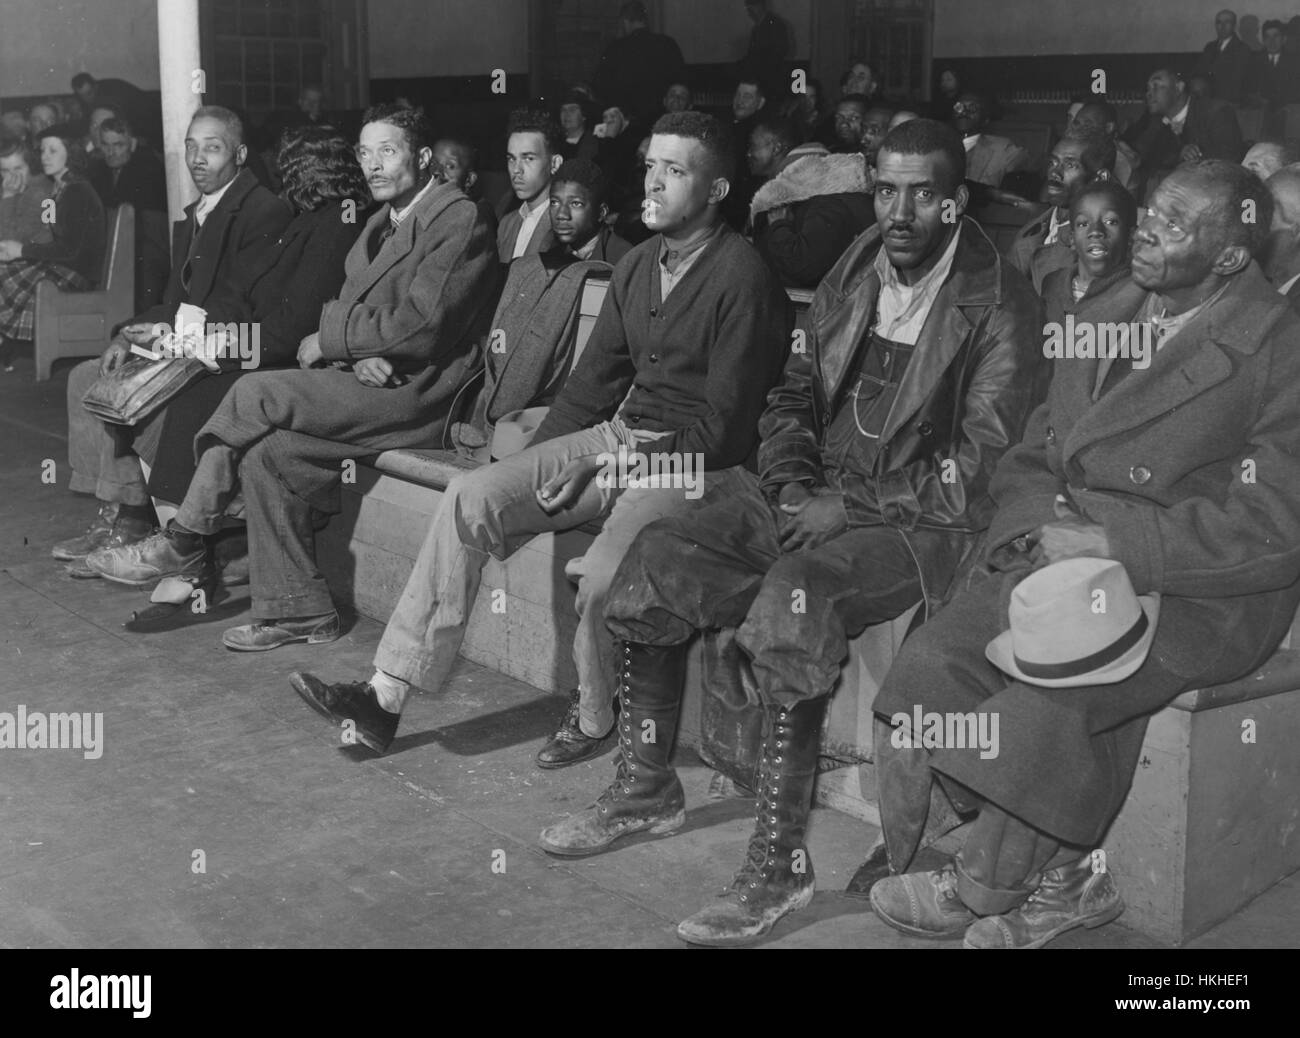 A photograph of men and women sitting on long wooden benches in a court room, most people are wearing formal clothing as they are attending a Superior Court trial in relation to an automobile accident, the crowd is a mix of witnesses and spectators, Oxford, North Carolina, November, 1939. From the New York Public Library. Stock Photo